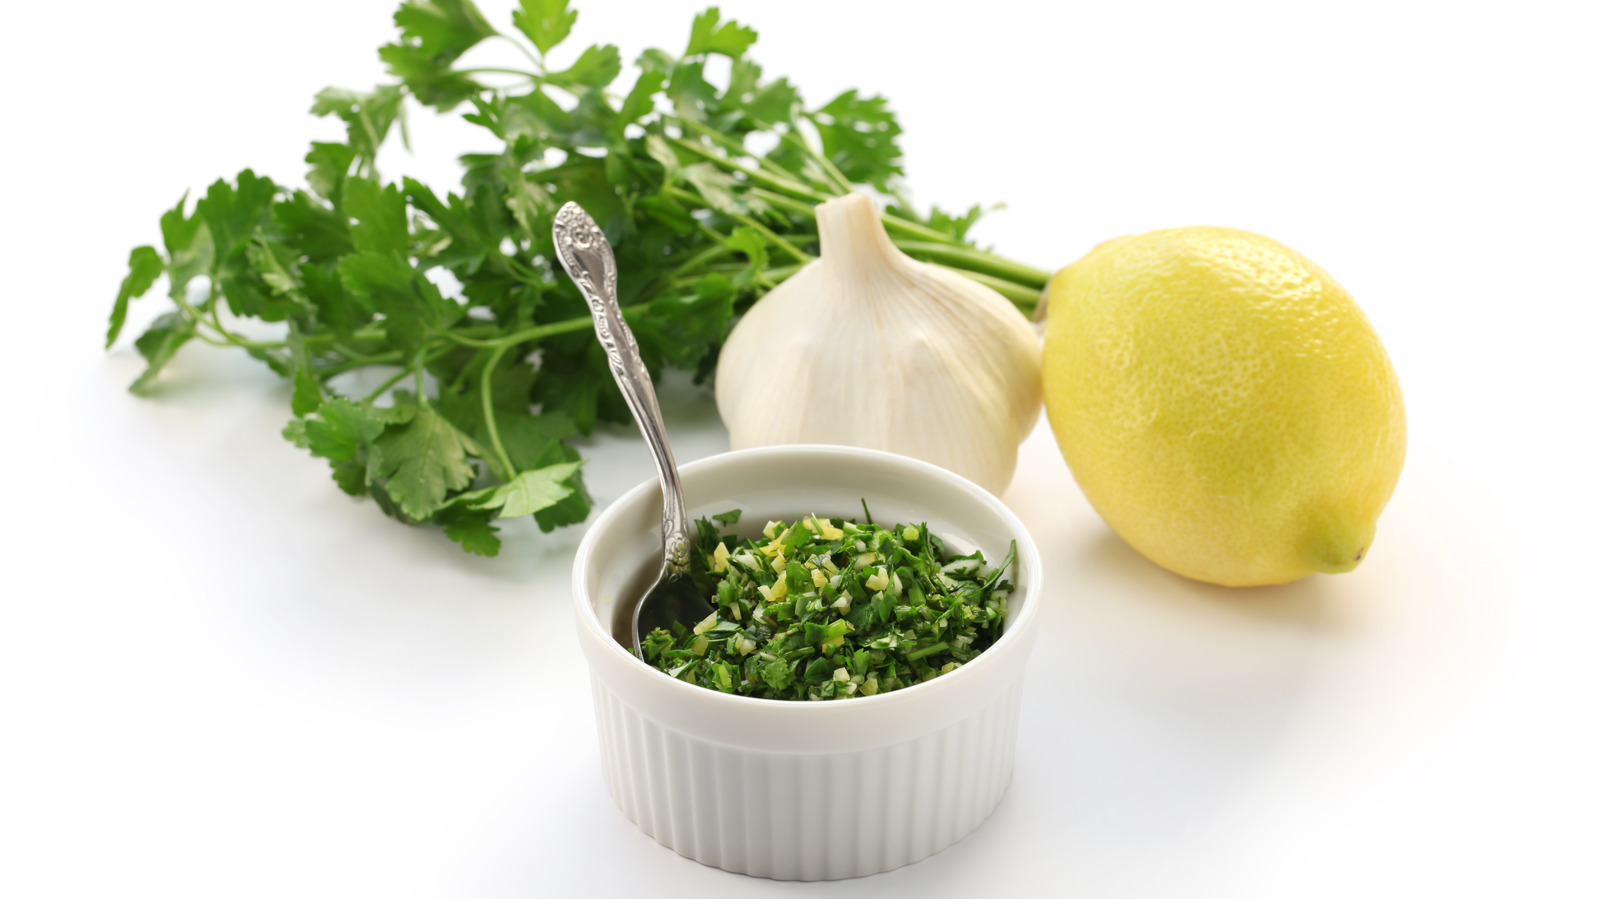 14 Ways To Customize Gremolata For Herby Harmony – Tasting Table